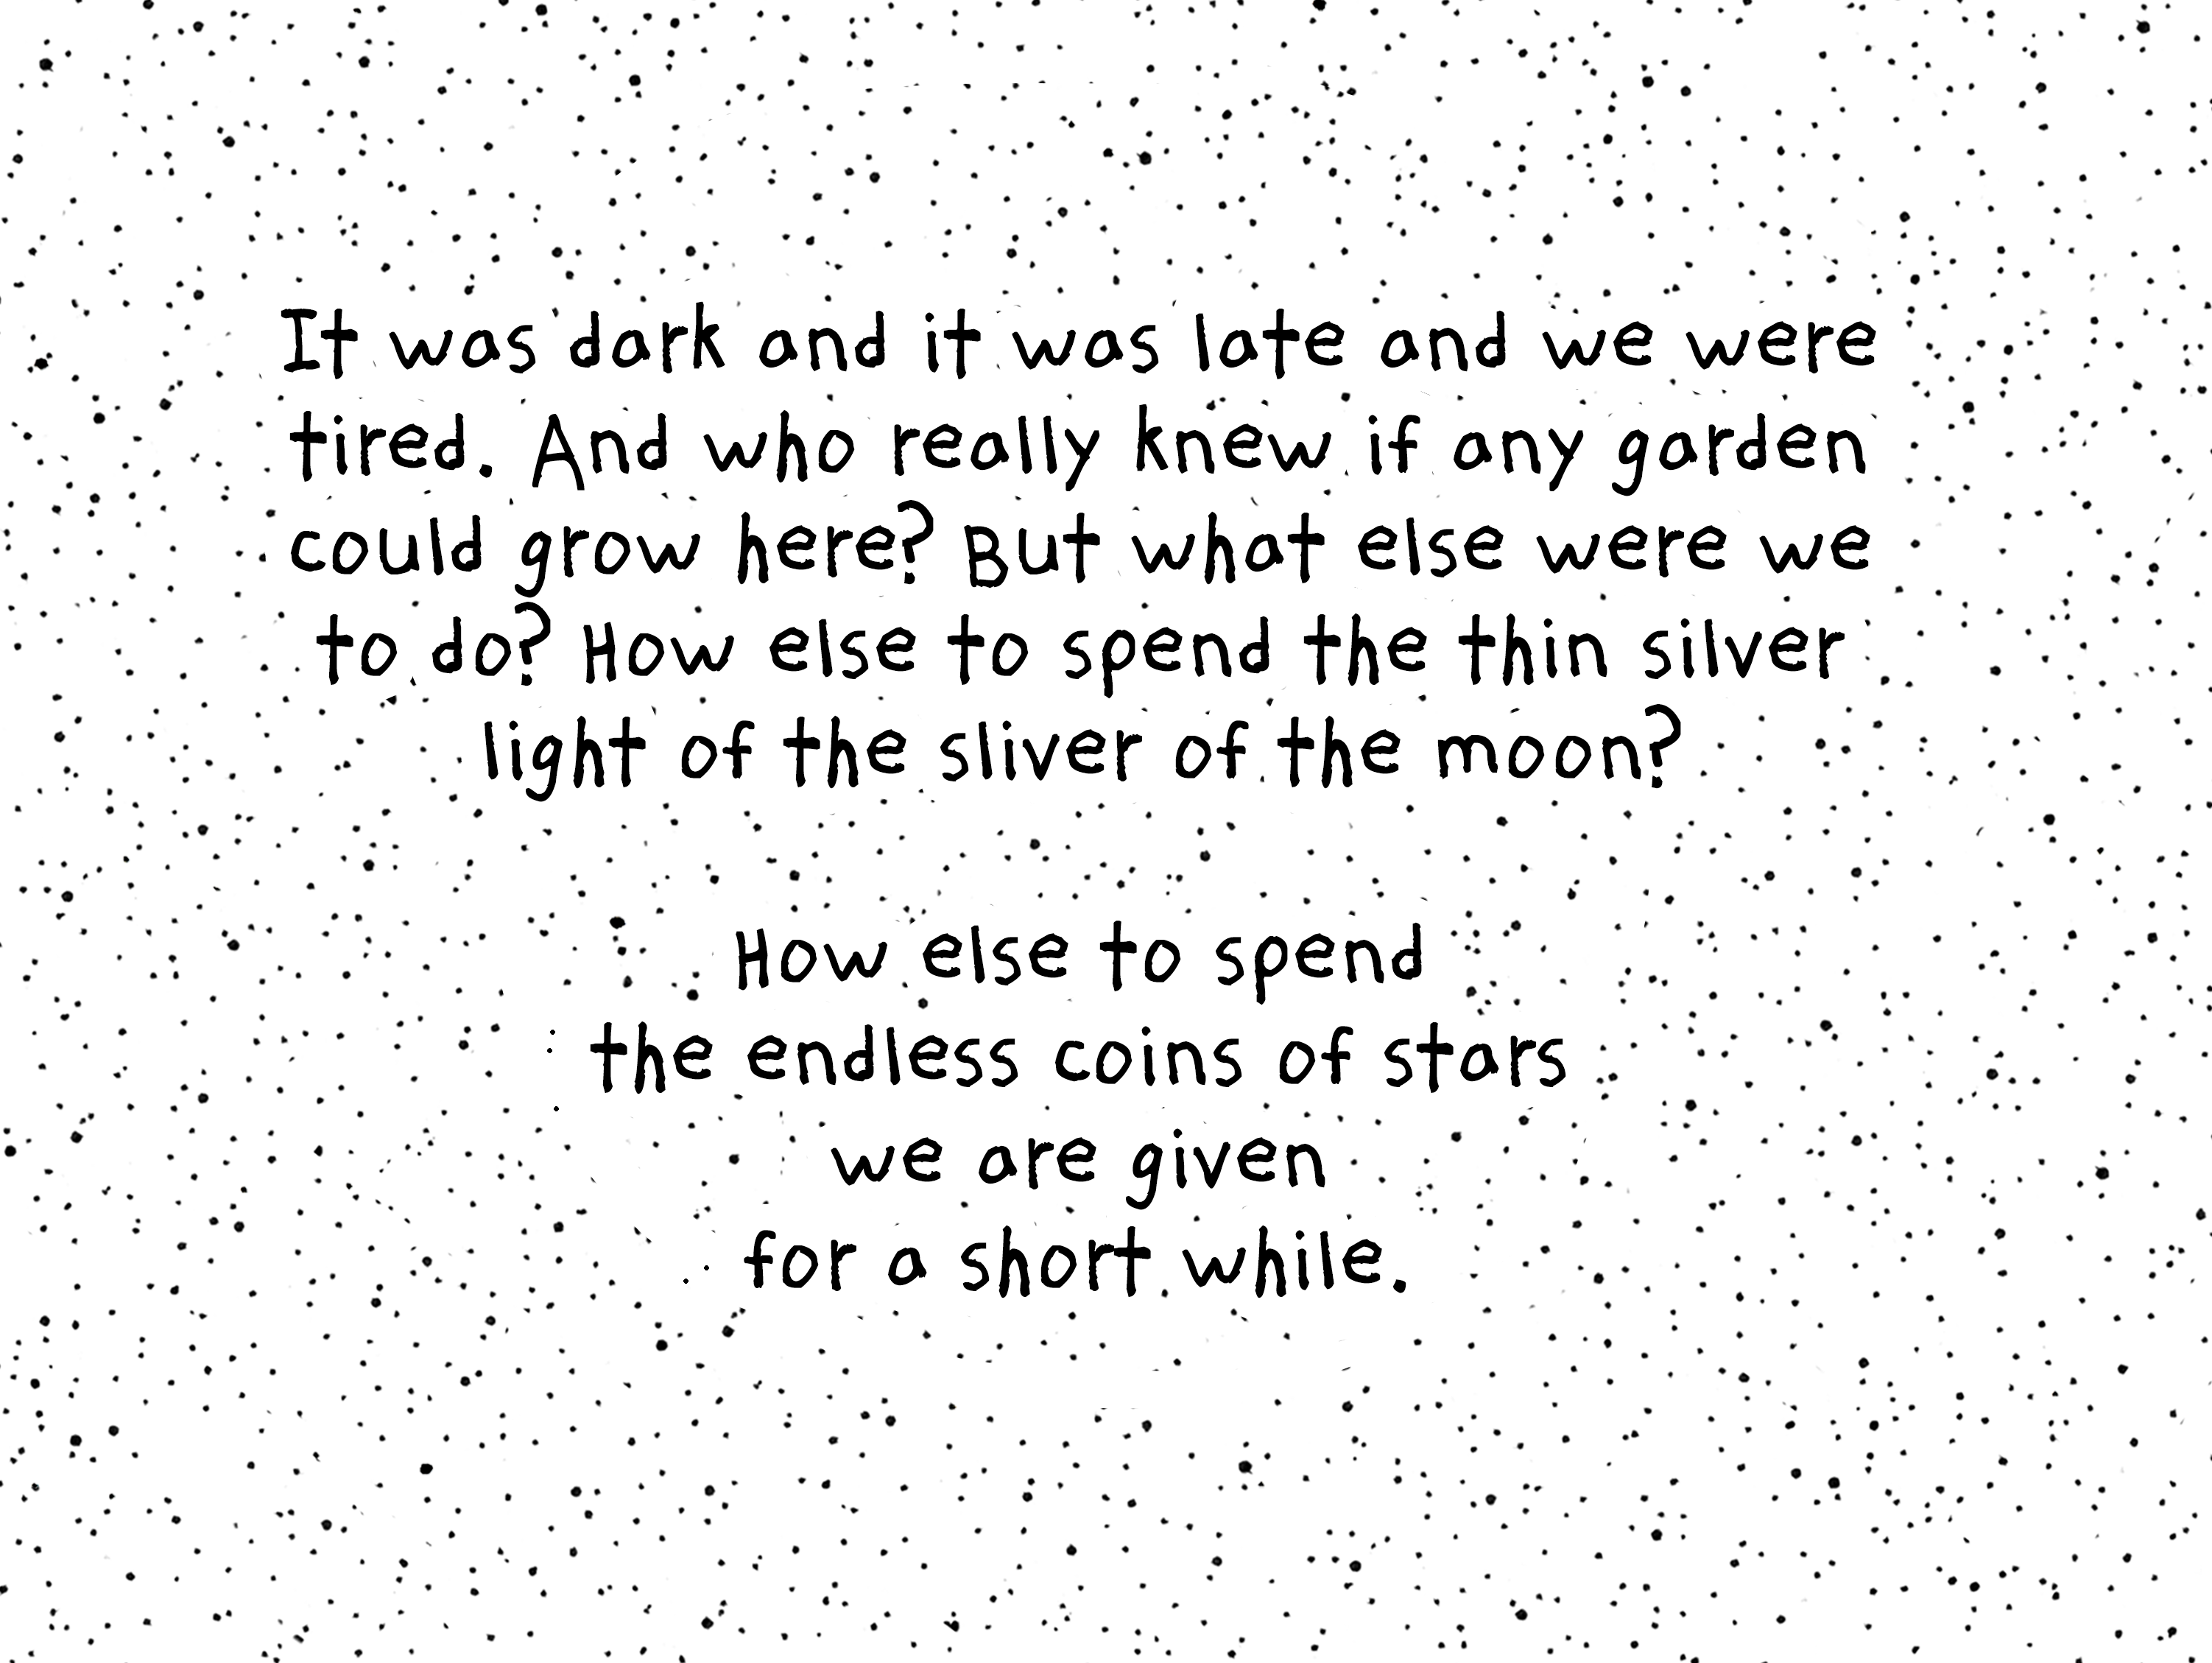 endless coins of stars.